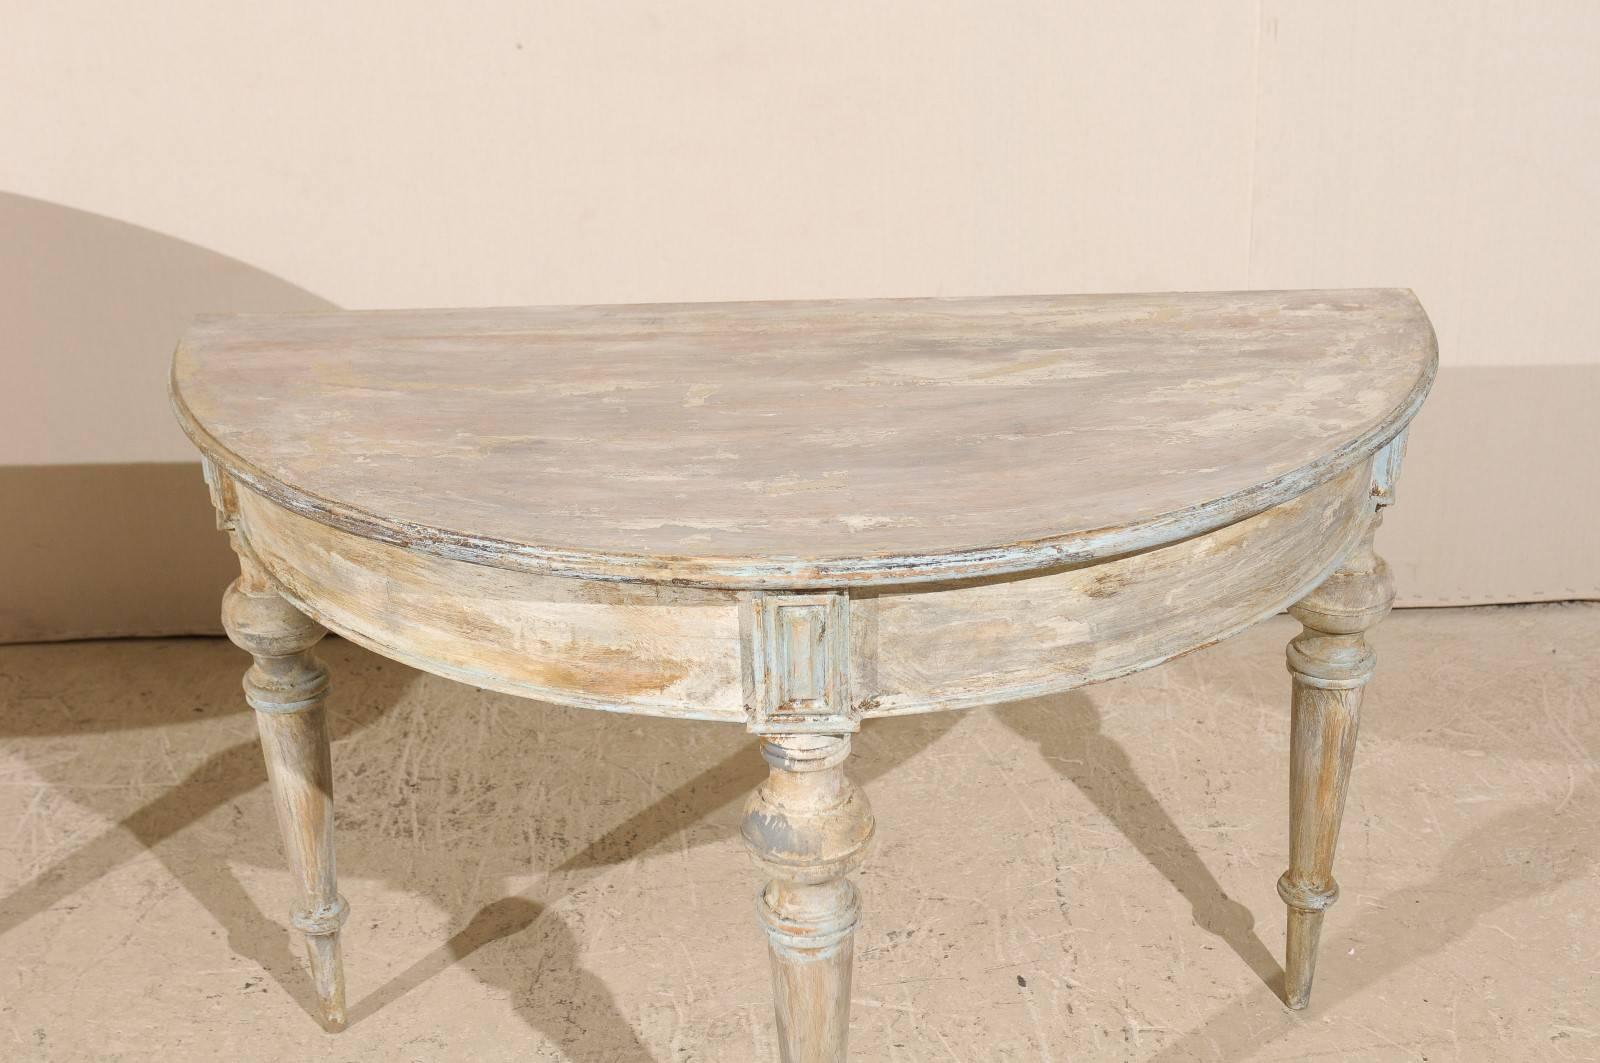 Pair of 19th Century Swedish Demilune Tables in Taupe, Cream & Soft Blue Colors 2